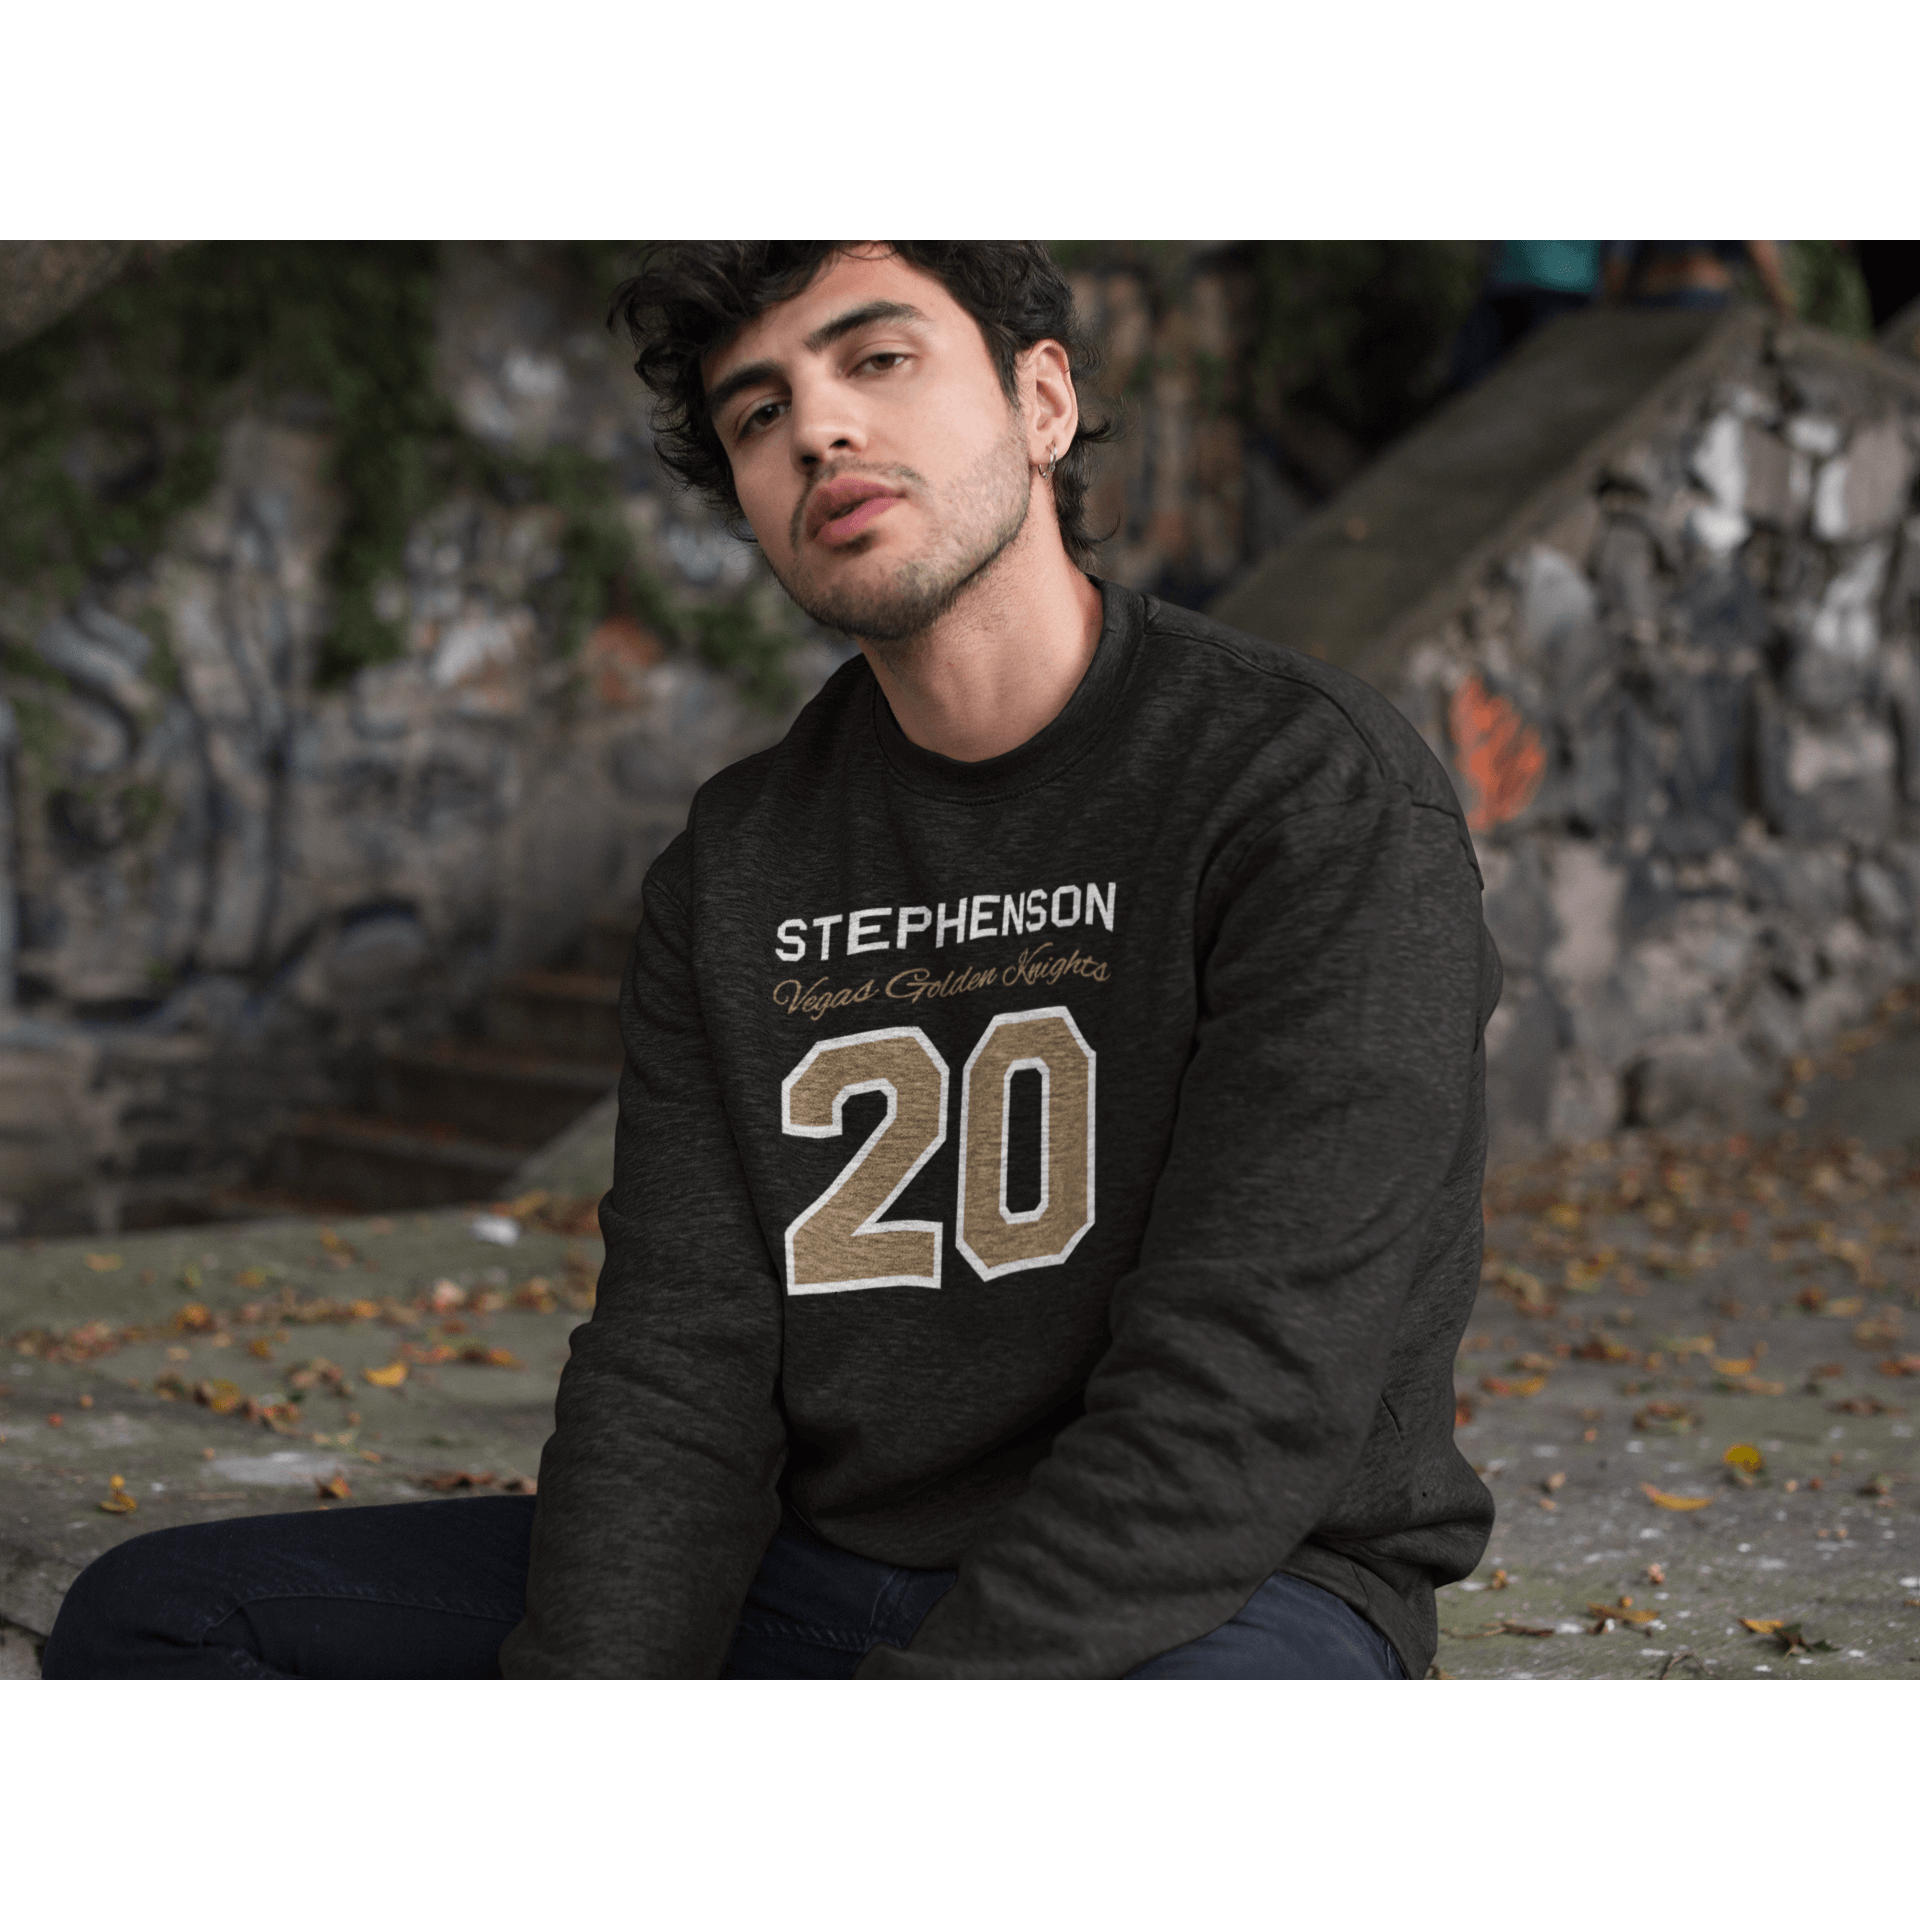 YoursOnDemandShop Stephenson Youth T-Shirt | Golden Knights | Las Vegas | Chandler | Made to Order with Love